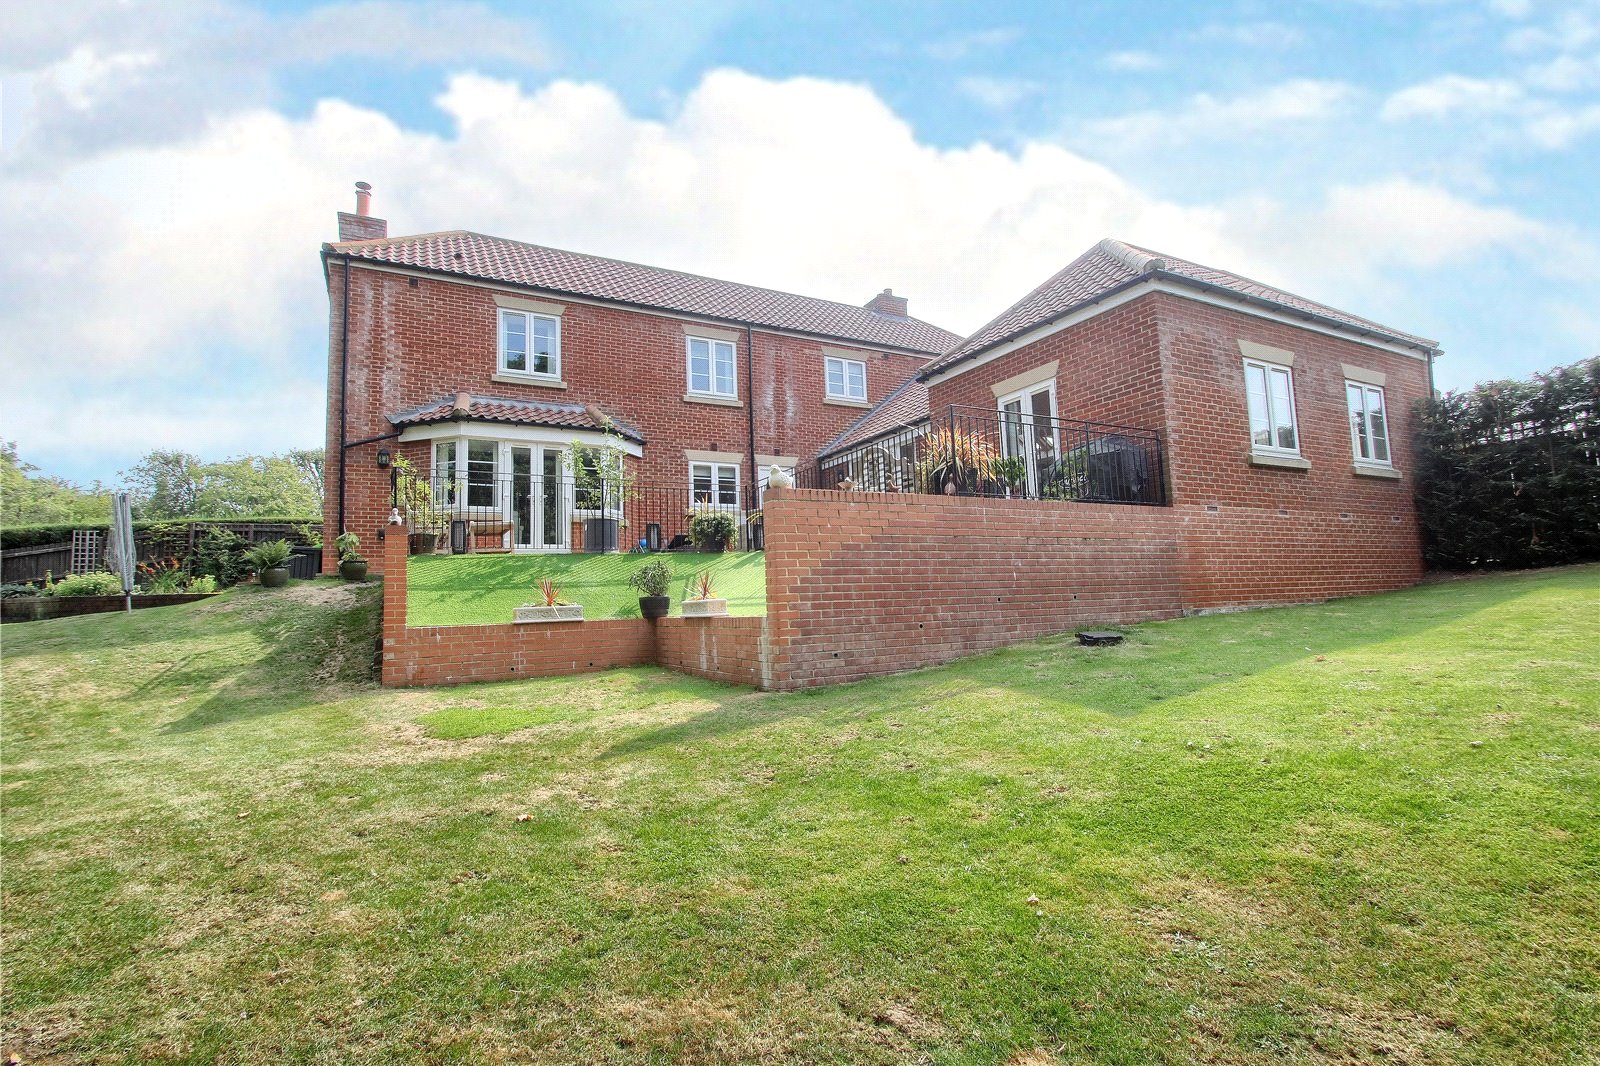 5 bed house for sale in Leven Road, Yarm 1